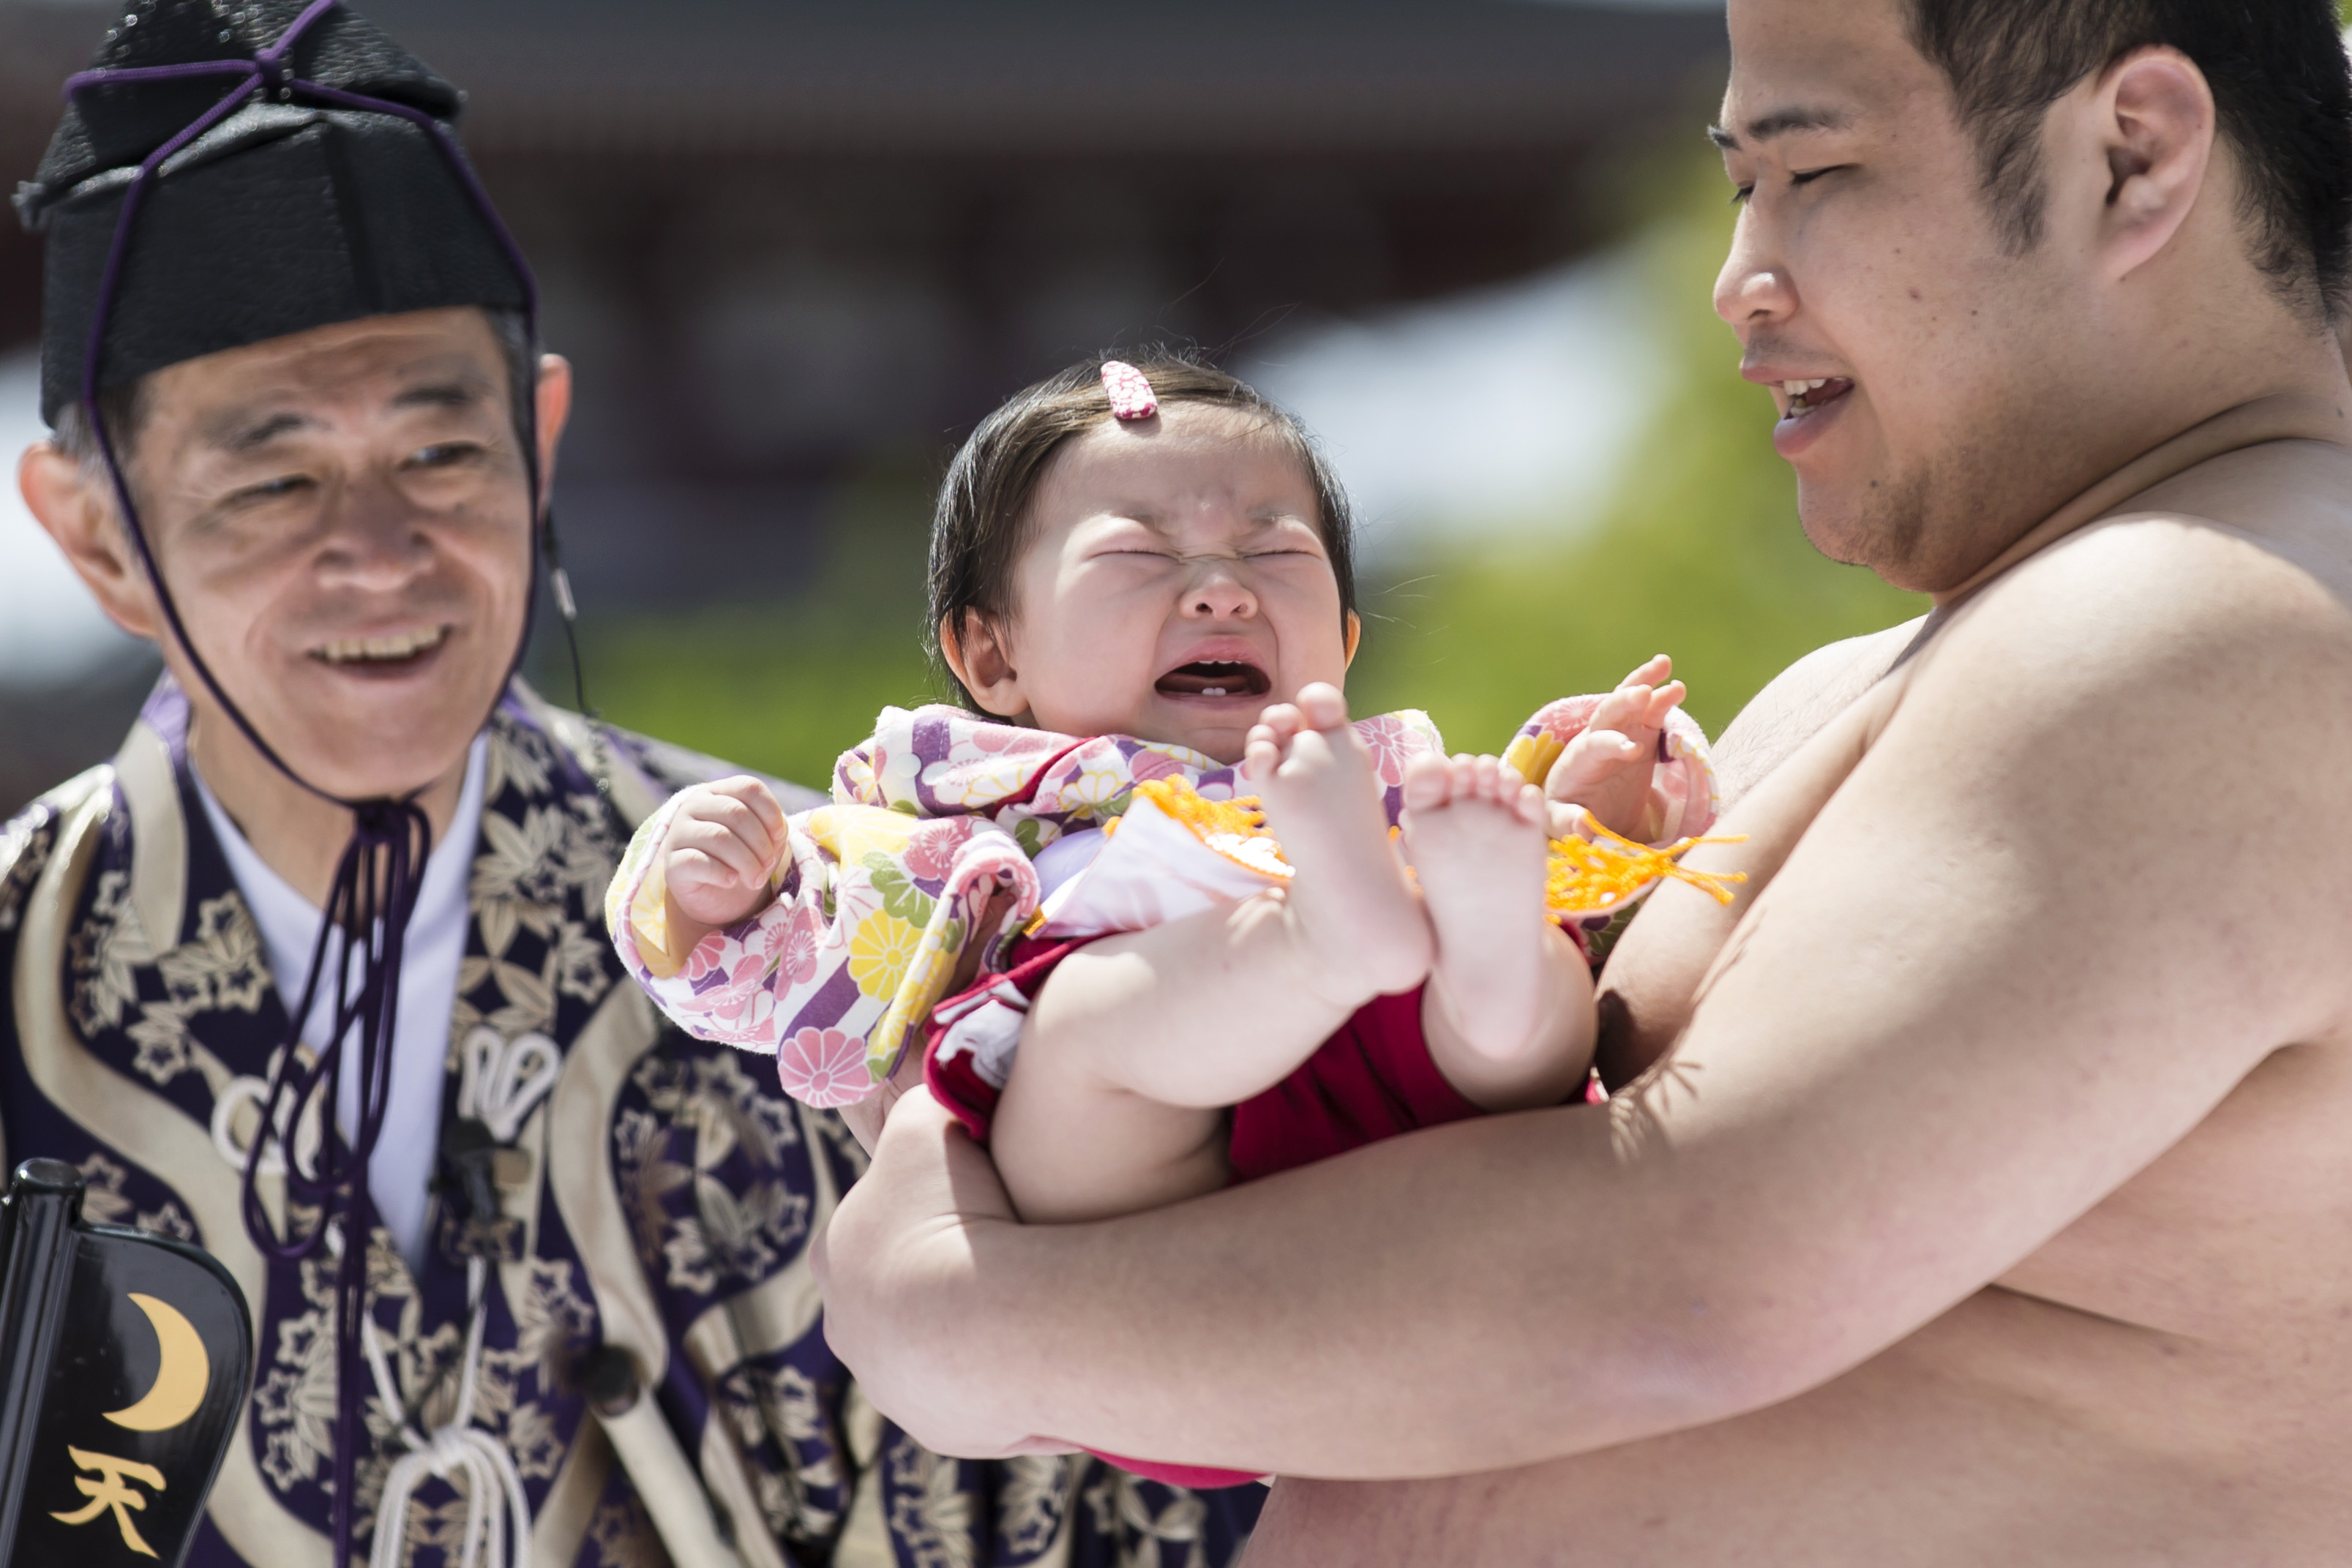 A baby, held by a sumo wrestler, cries during the Nakizumo or Naki Sumo Baby Crying contest at Sensoji Temple on April 28, 2019, in Tokyo, Japan. | Source: Getty Images